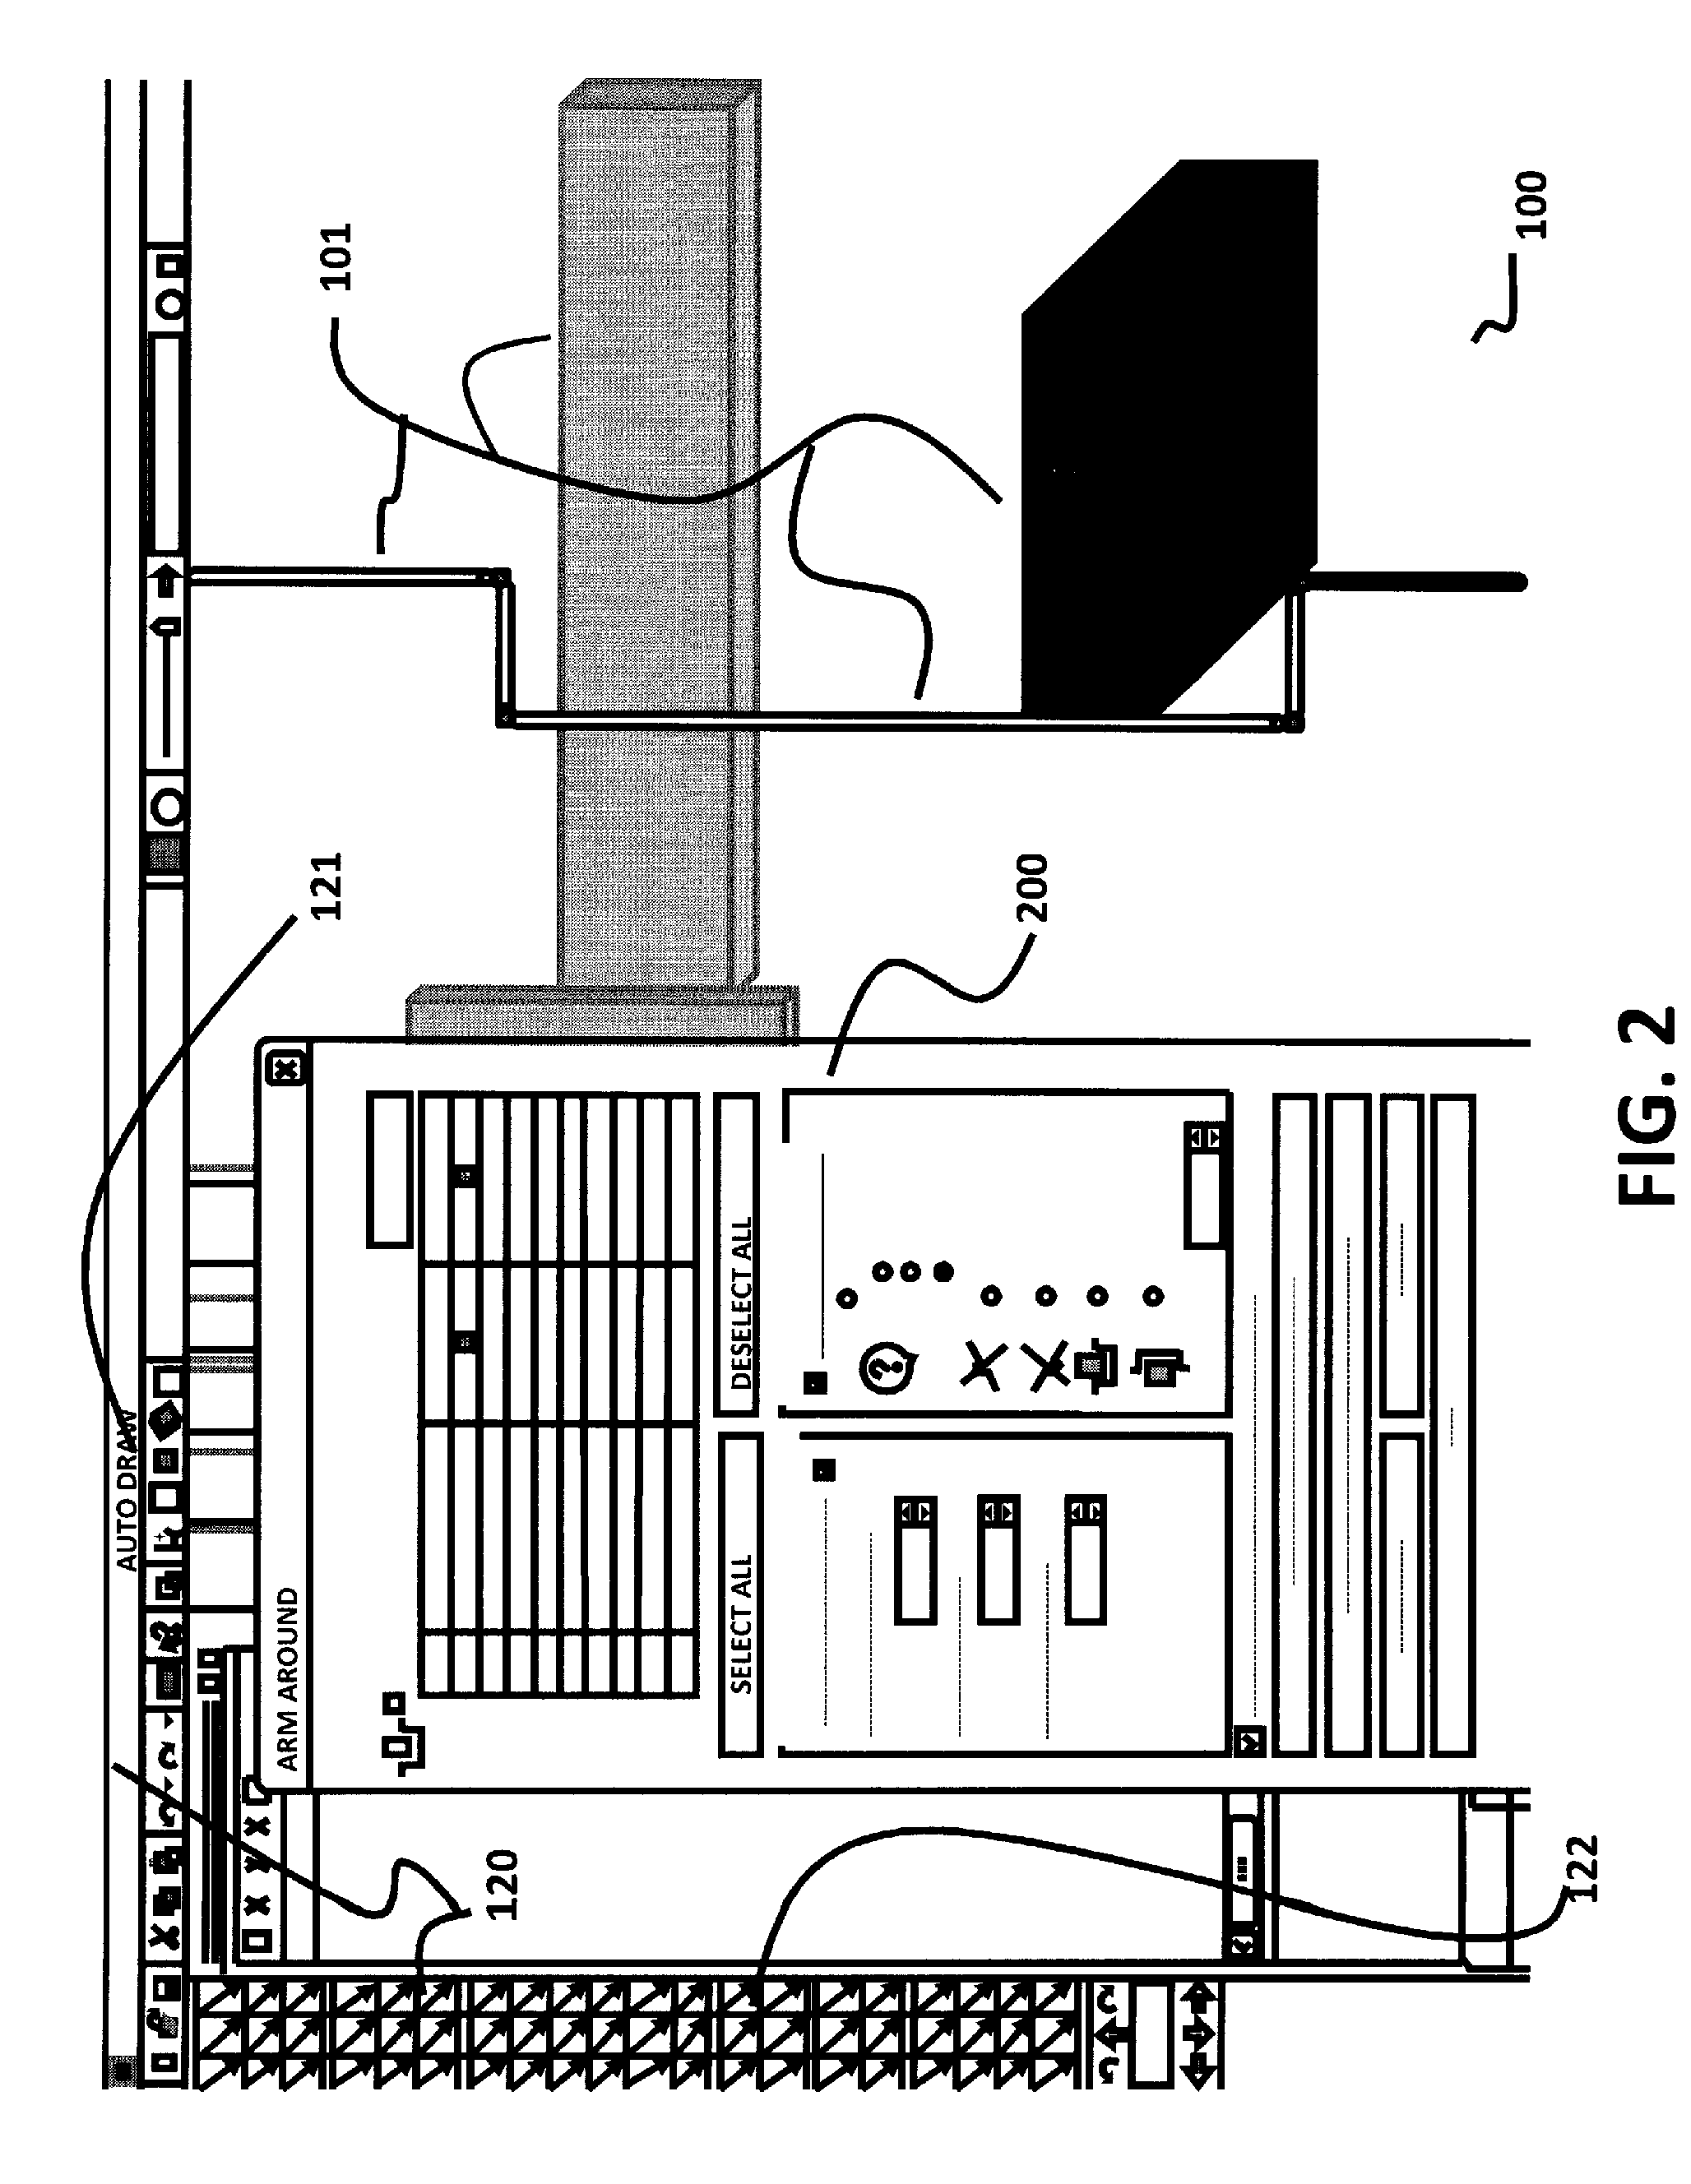 Methods and apparatuses for resolving a CAD drawing conflict with an arm around